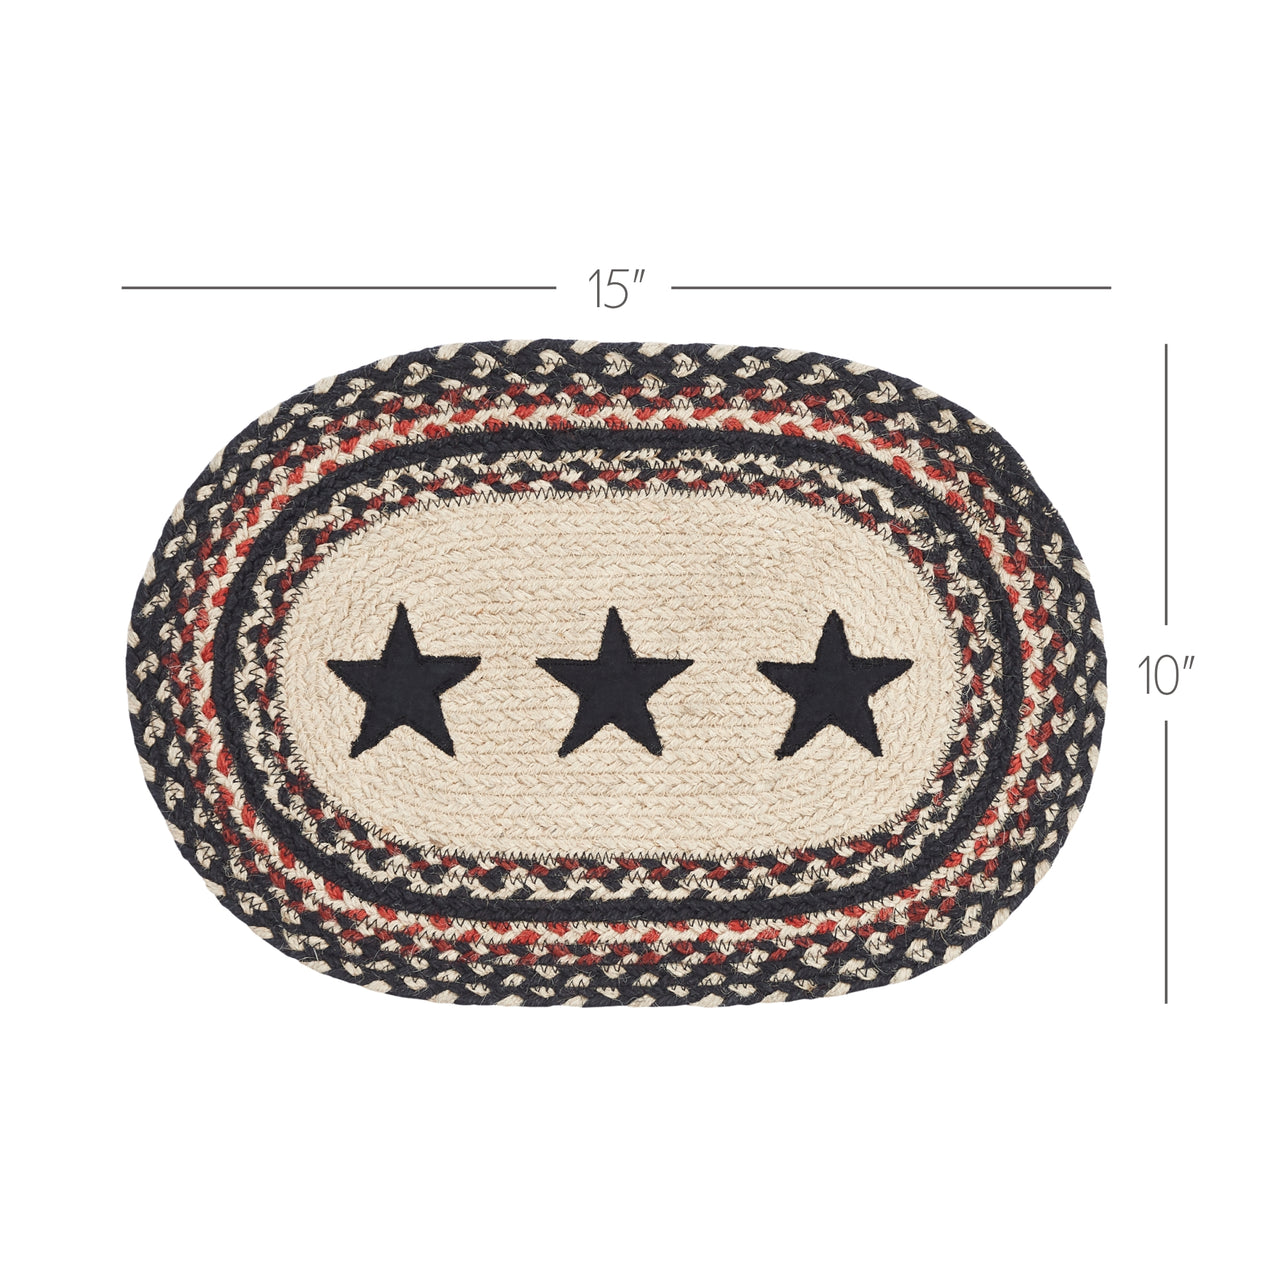 Colonial Star Jute Braided Oval Placemat 10"x15" VHC Brands